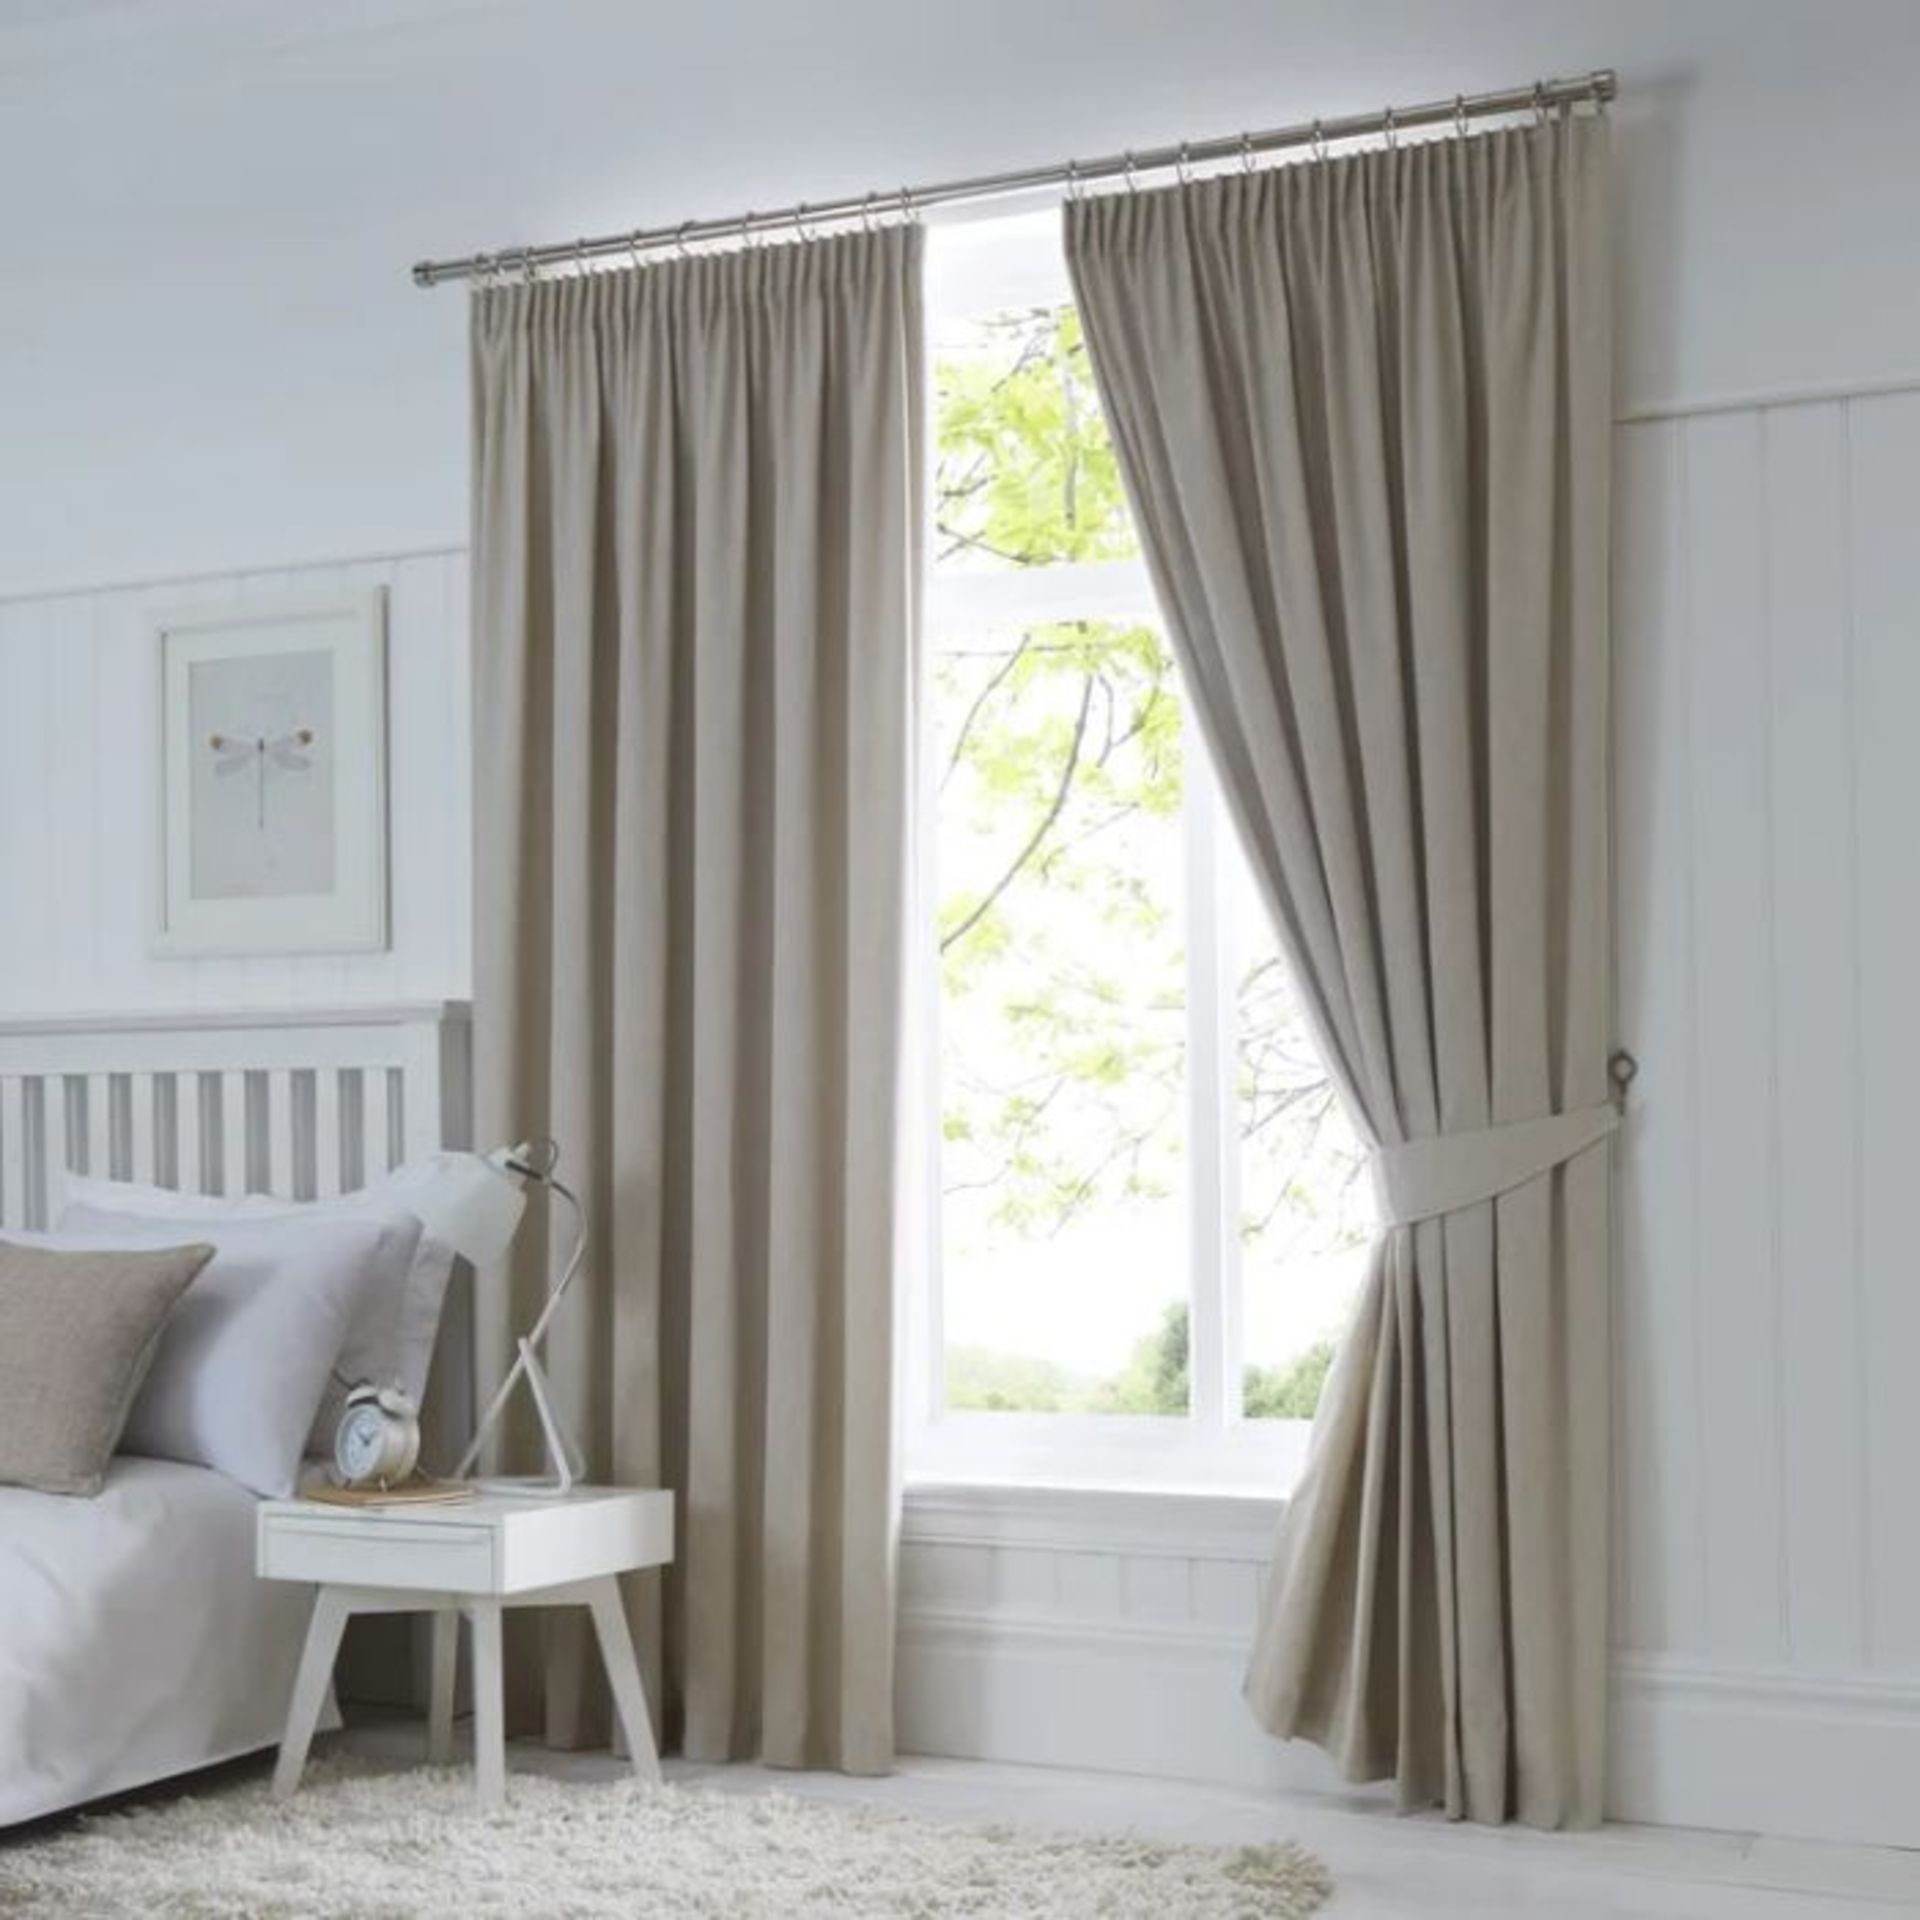 Marlow Home Co., Coleraine Pencil Pleat Blackout Thermal Curtains (NATURAL) (165 W x 229 D cm) - - Image 4 of 4